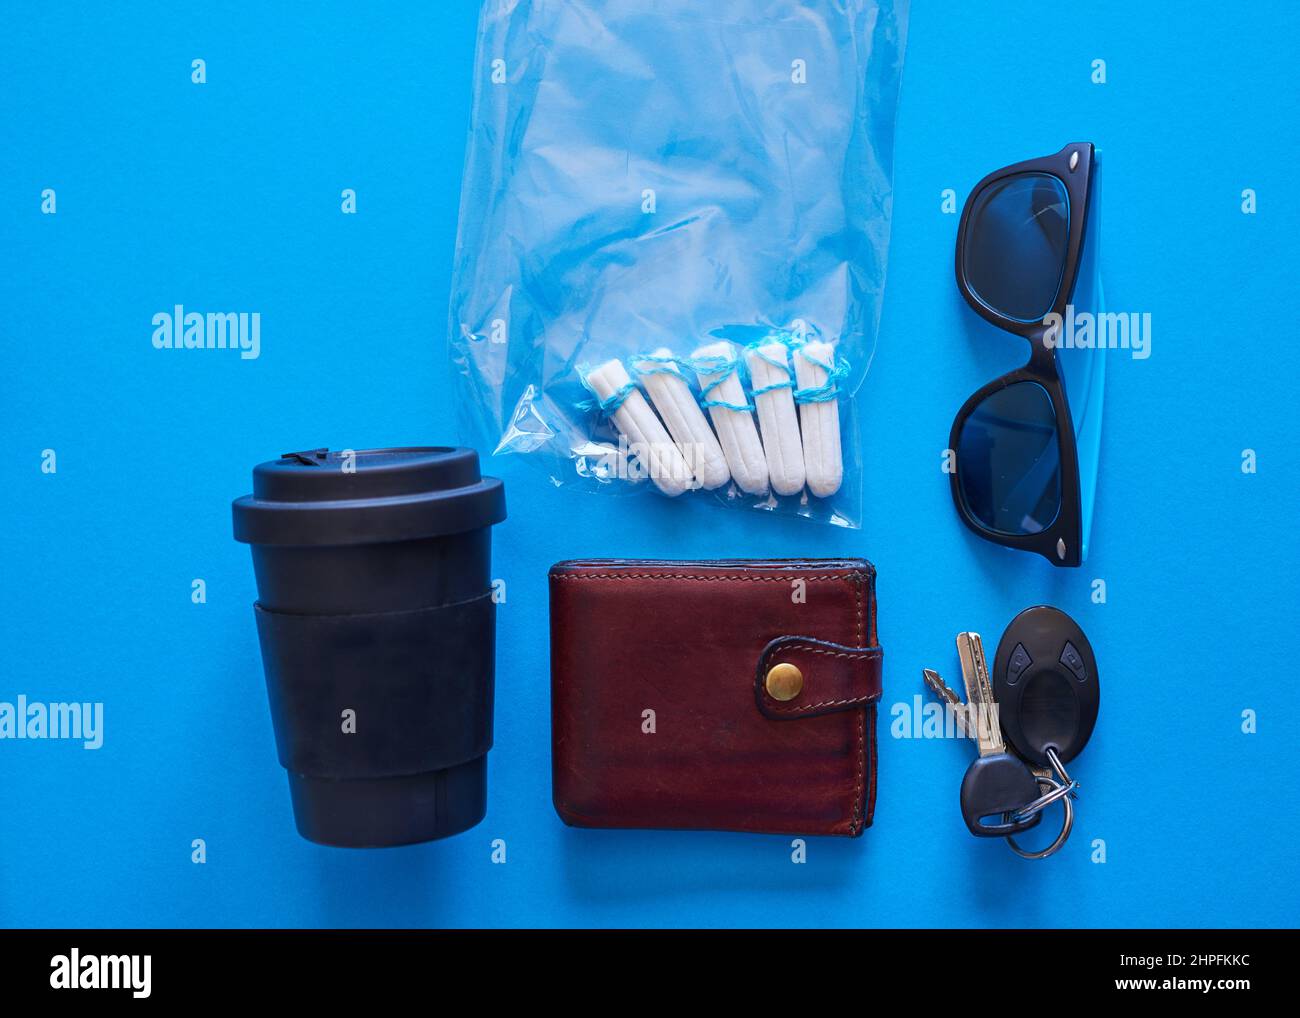 A flat lay showing lifestyle ojects with tampons Stock Photo